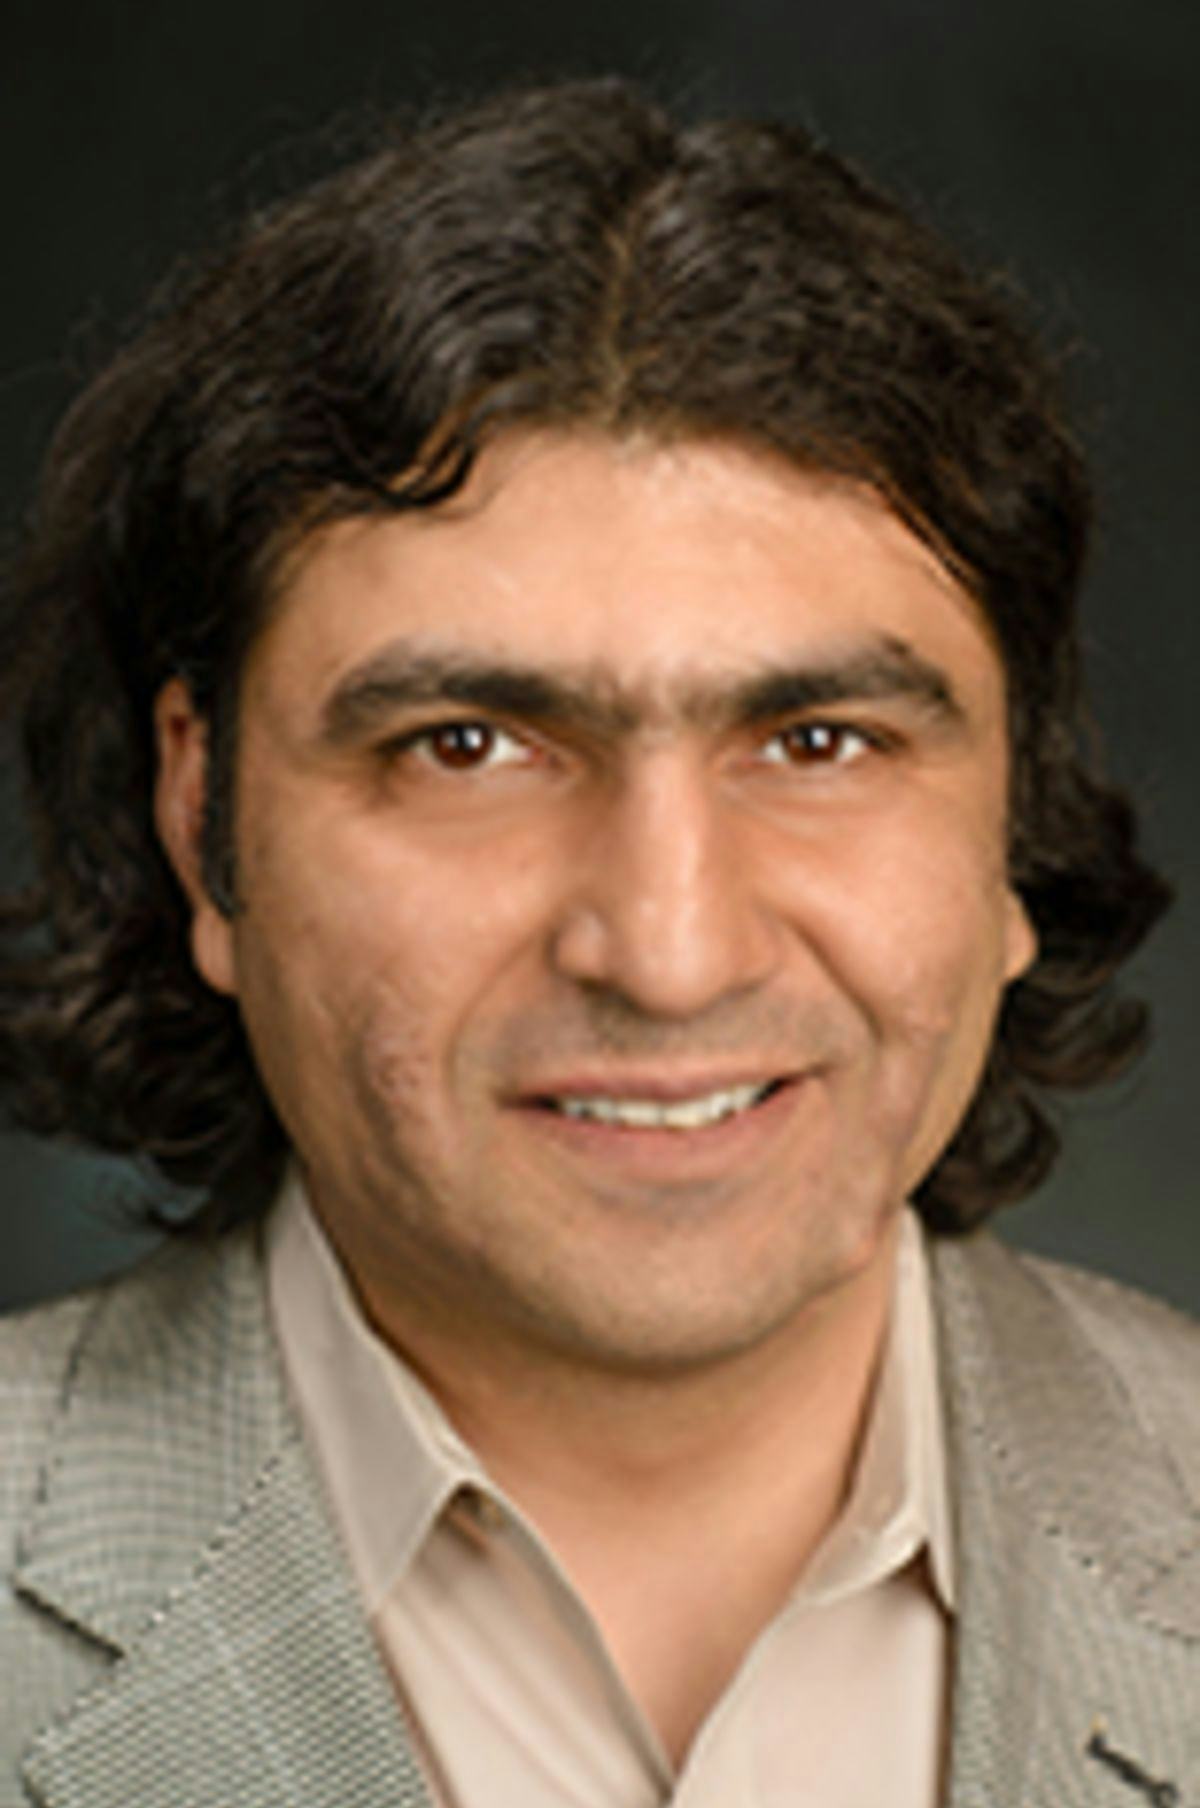 Headshot of Dr. Ionut Florescu in a light jacket in front of a dark background